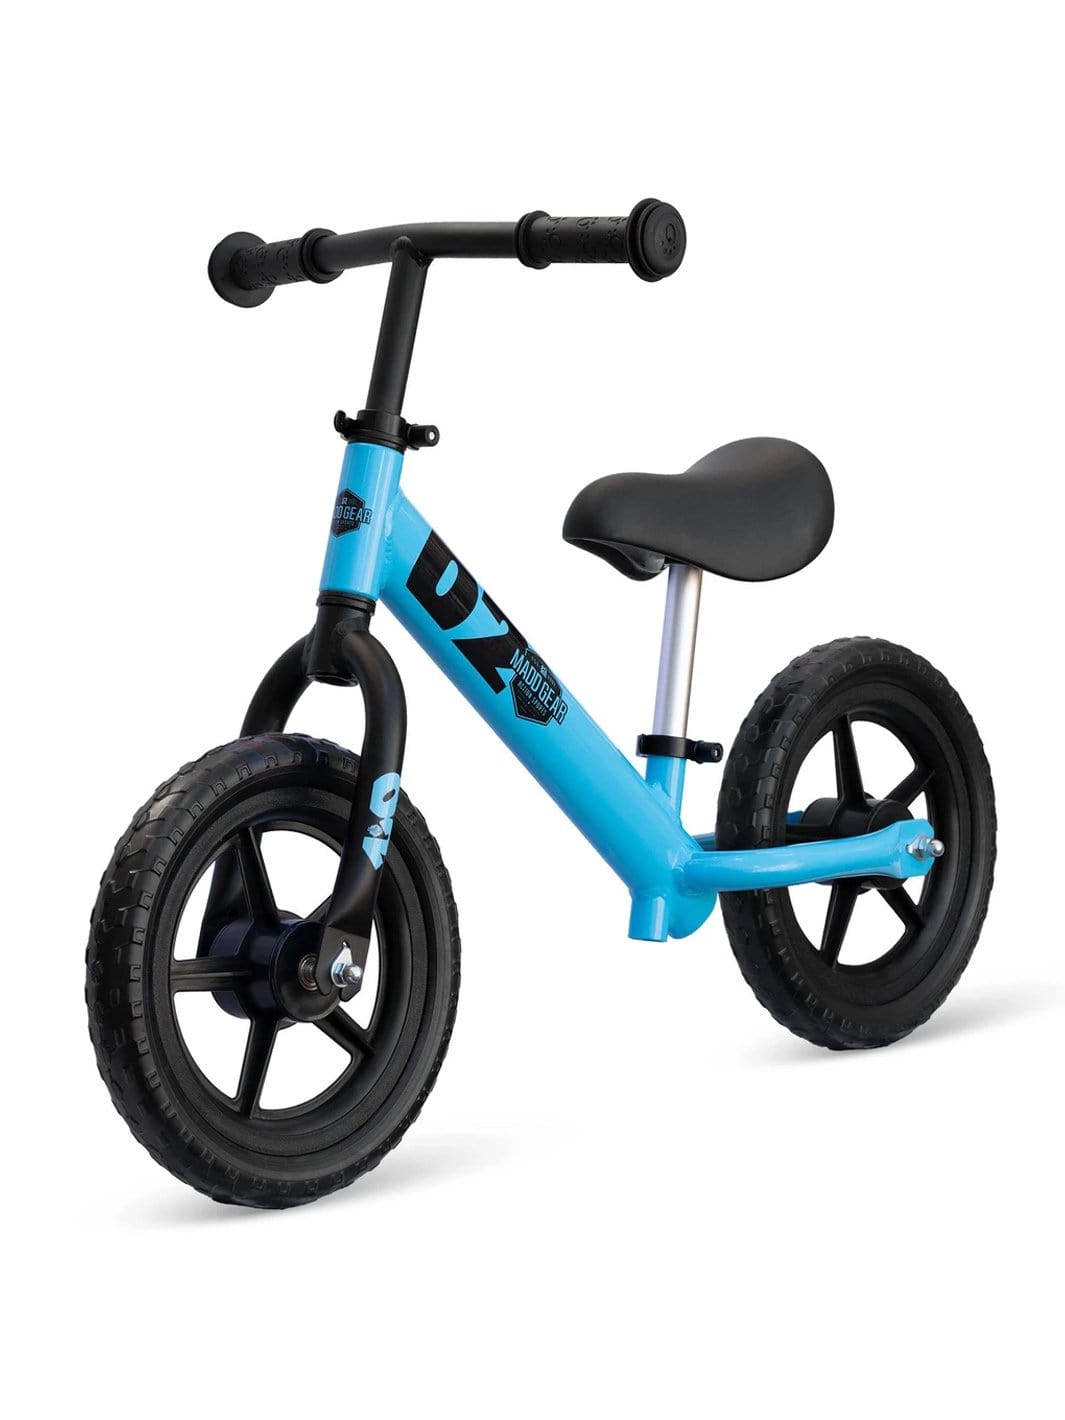 Madd Gear Kids Toddler Balance Bike Bicycle Foot to Floor Blue Learn